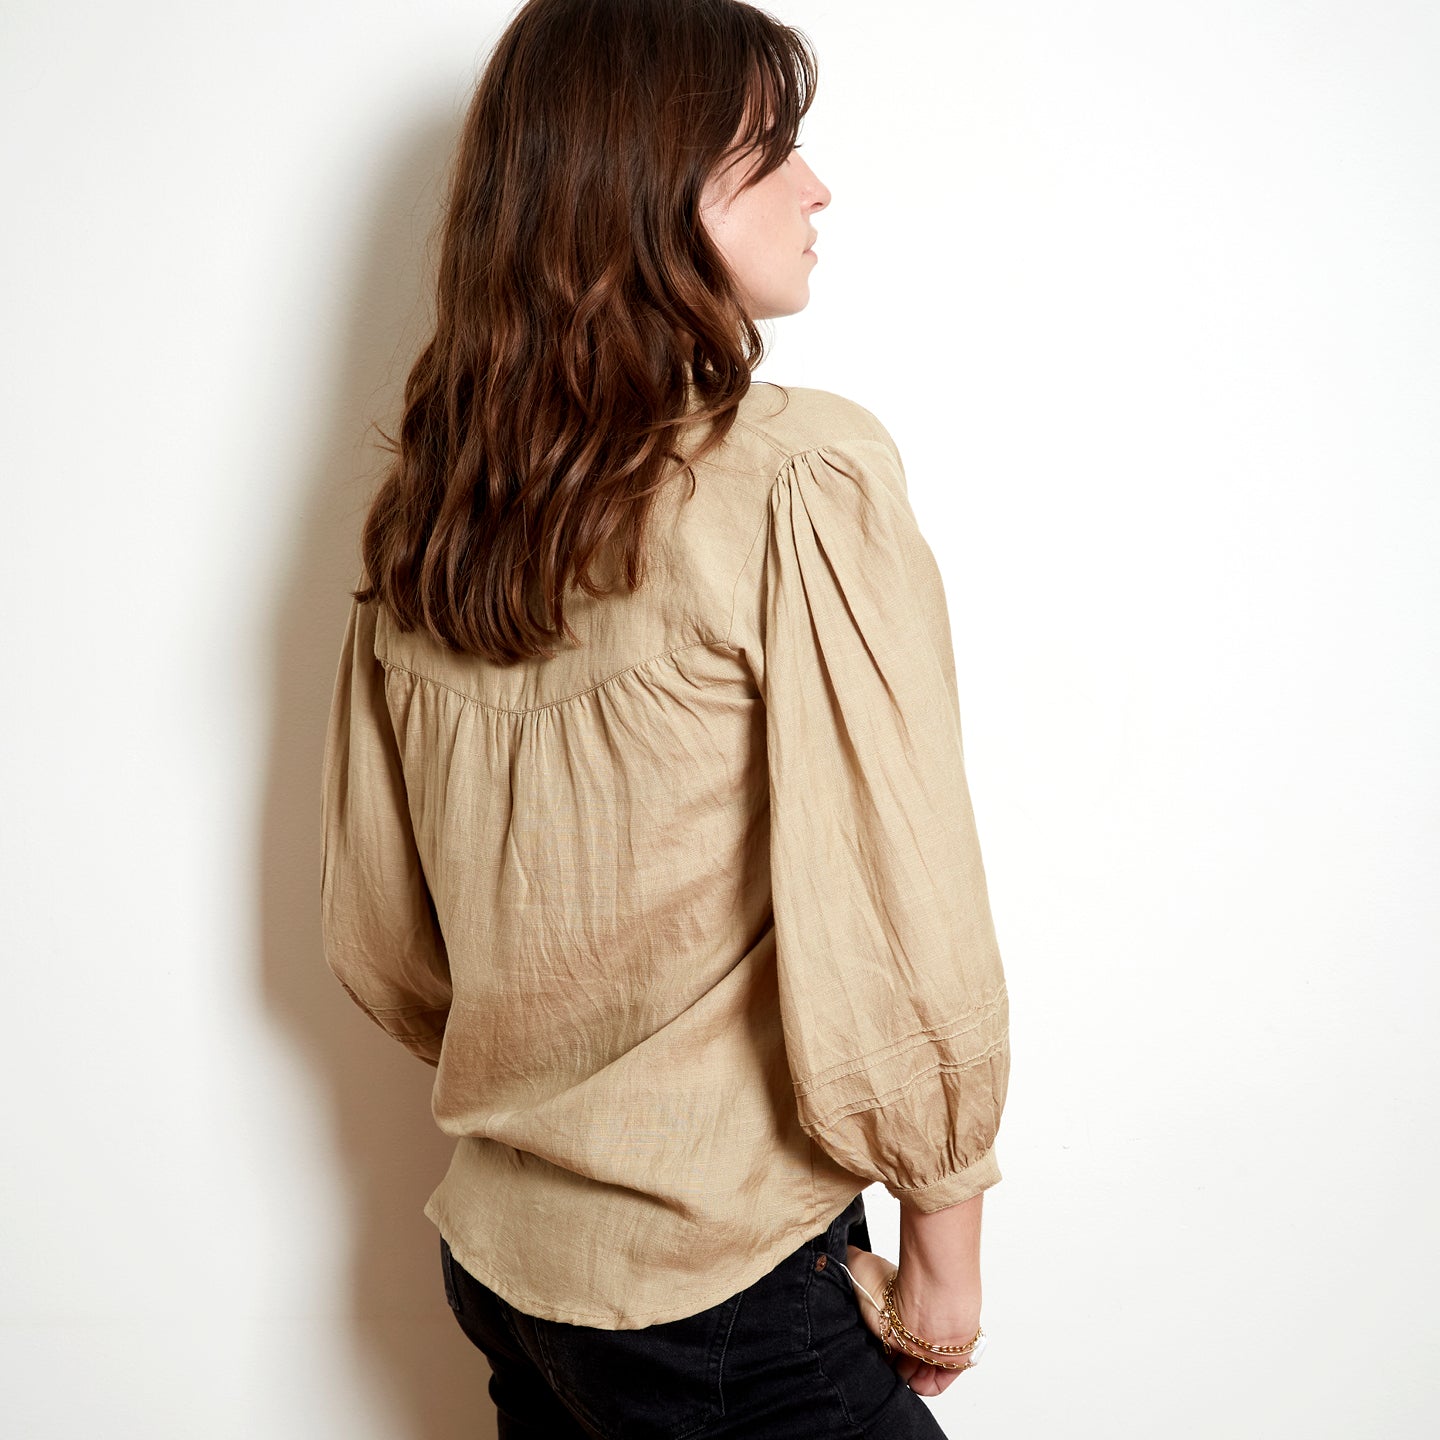 VOLANT BLOUSE IN OCHRE